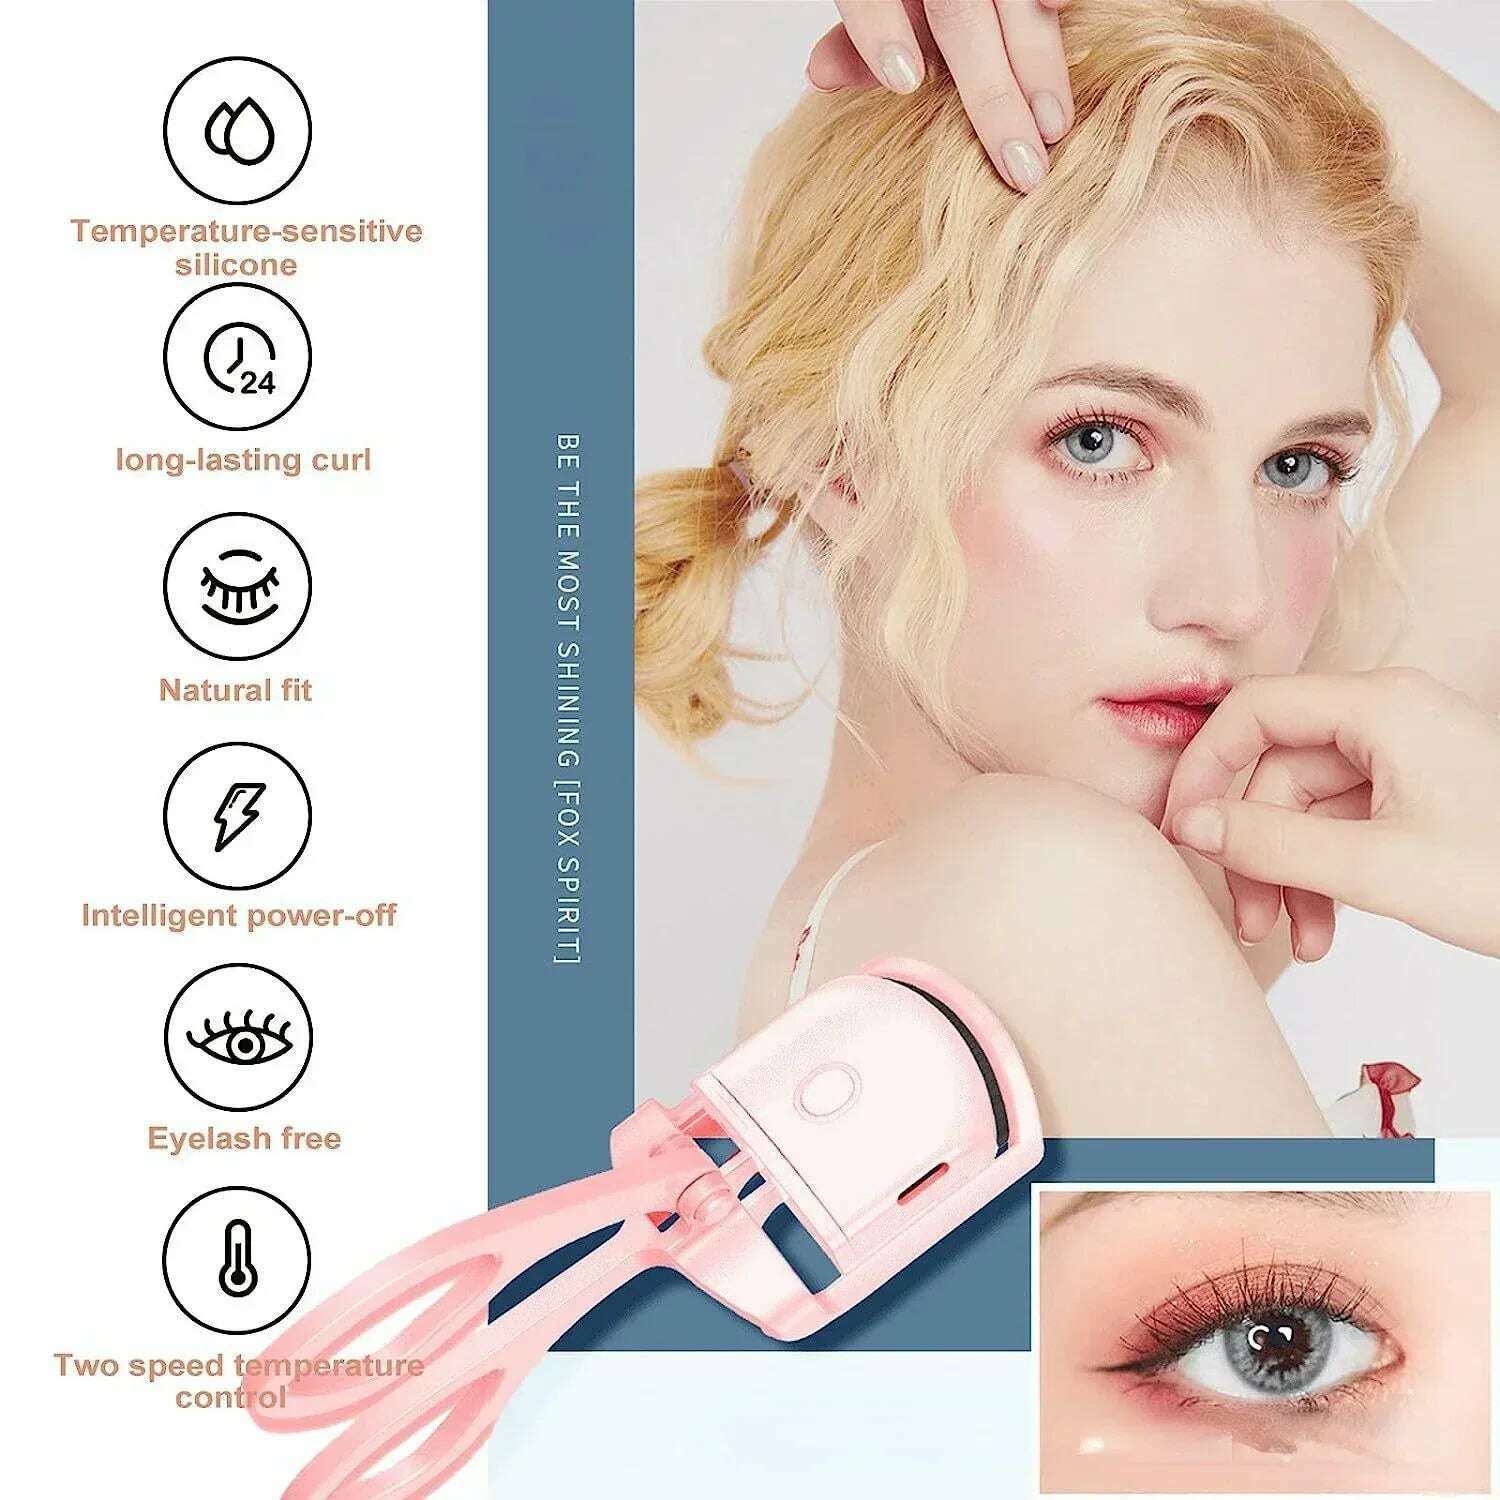 KIMLUD, Hot sale Electric Eyelash Curler USB Charging Model Fast Heating Portable Fast Shaping and Long Lasting Curling Eyelash Clip, KIMLUD Womens Clothes